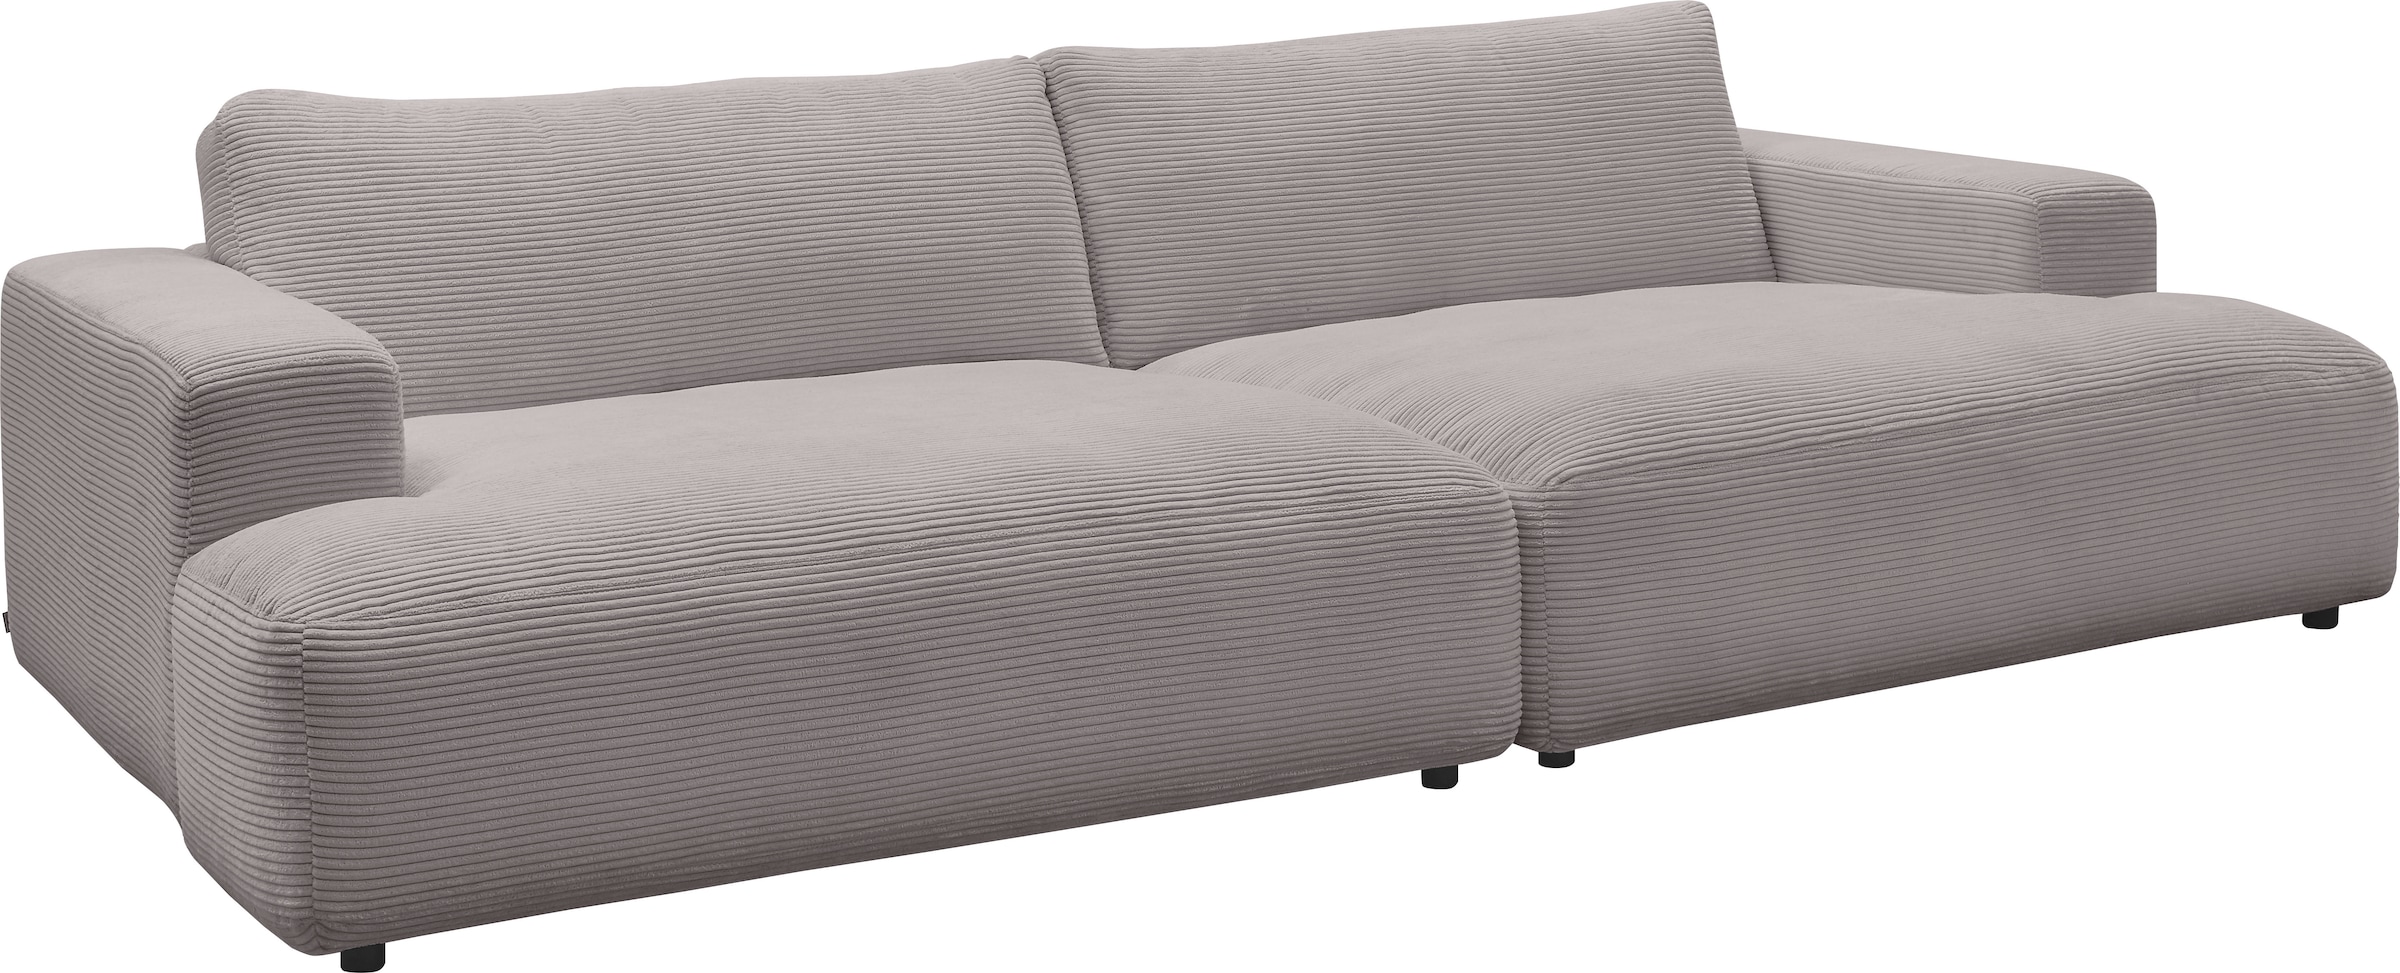 cm Musterring kaufen by 292 M »Lucia«, Cord-Bezug, Loungesofa Breite branded bequem GALLERY